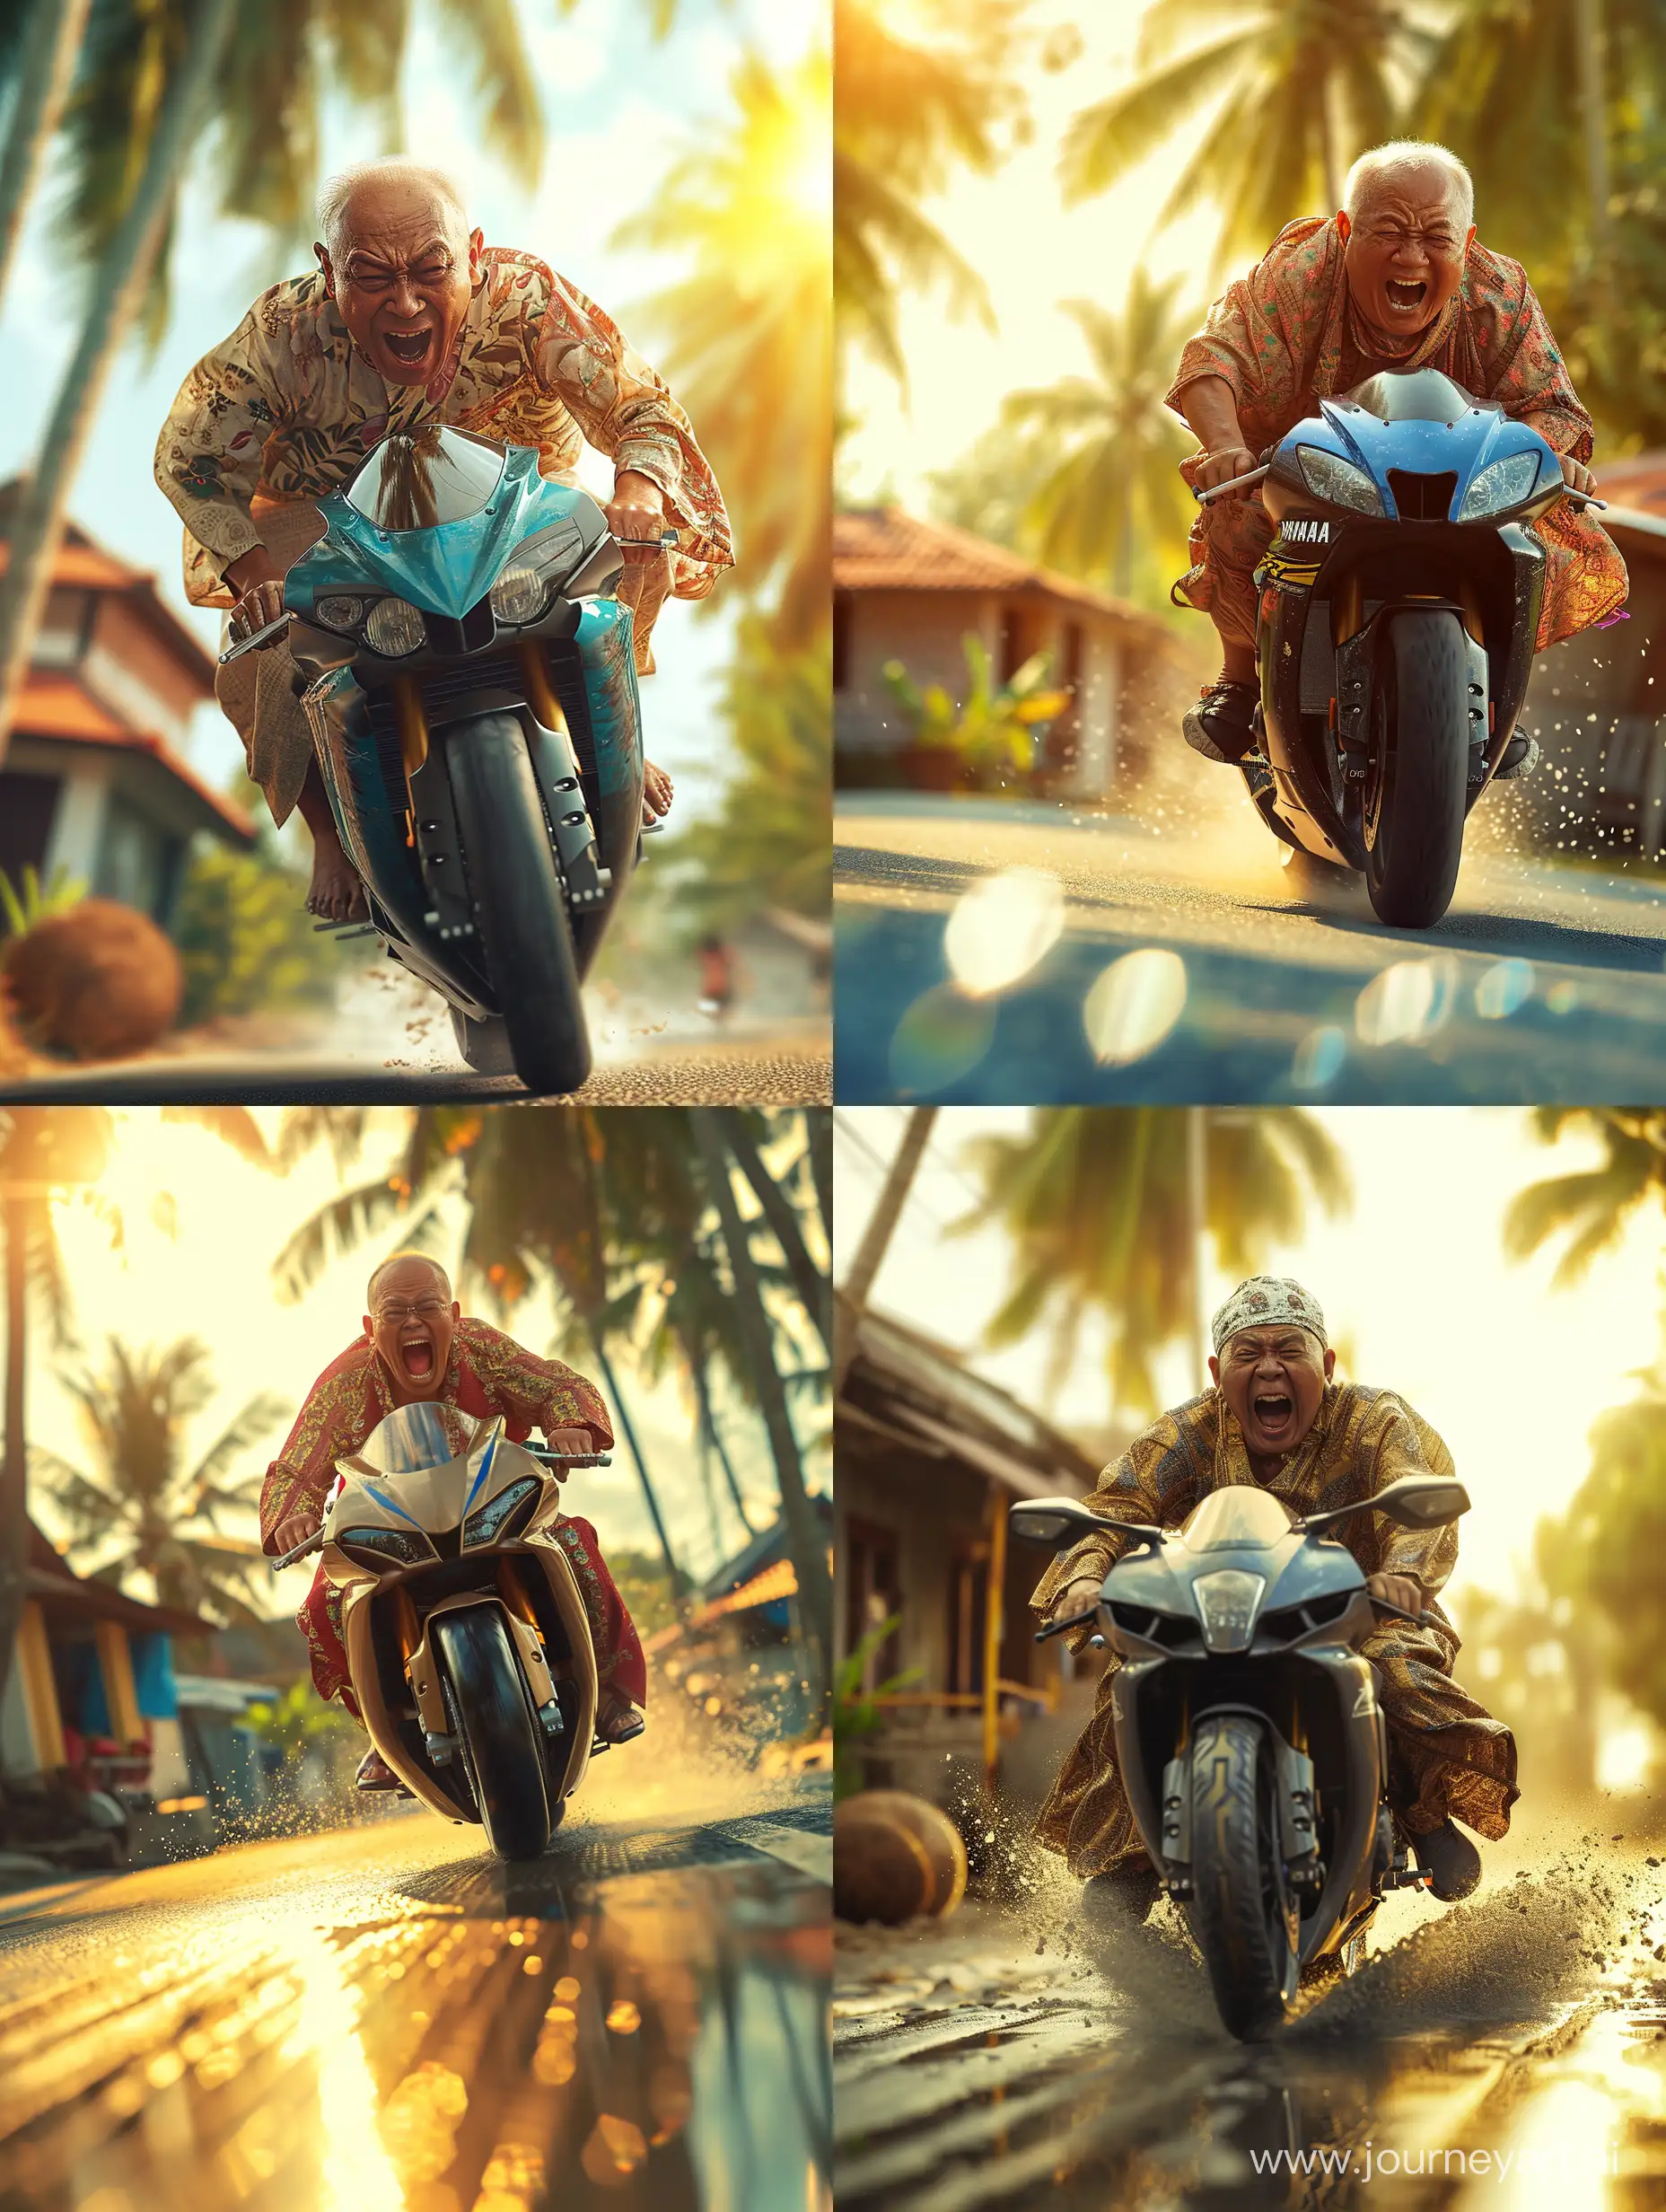 ultra realistic, close up a Malay uncle riding a yamaha R1 superbike wearing sarong cloth, baju melayu and songkok. Uncle screamed with pleasure. Background of Malay village and coconut trees. refraction of morning sunlight. canon eos-id x mark iii dslr --v 6.0